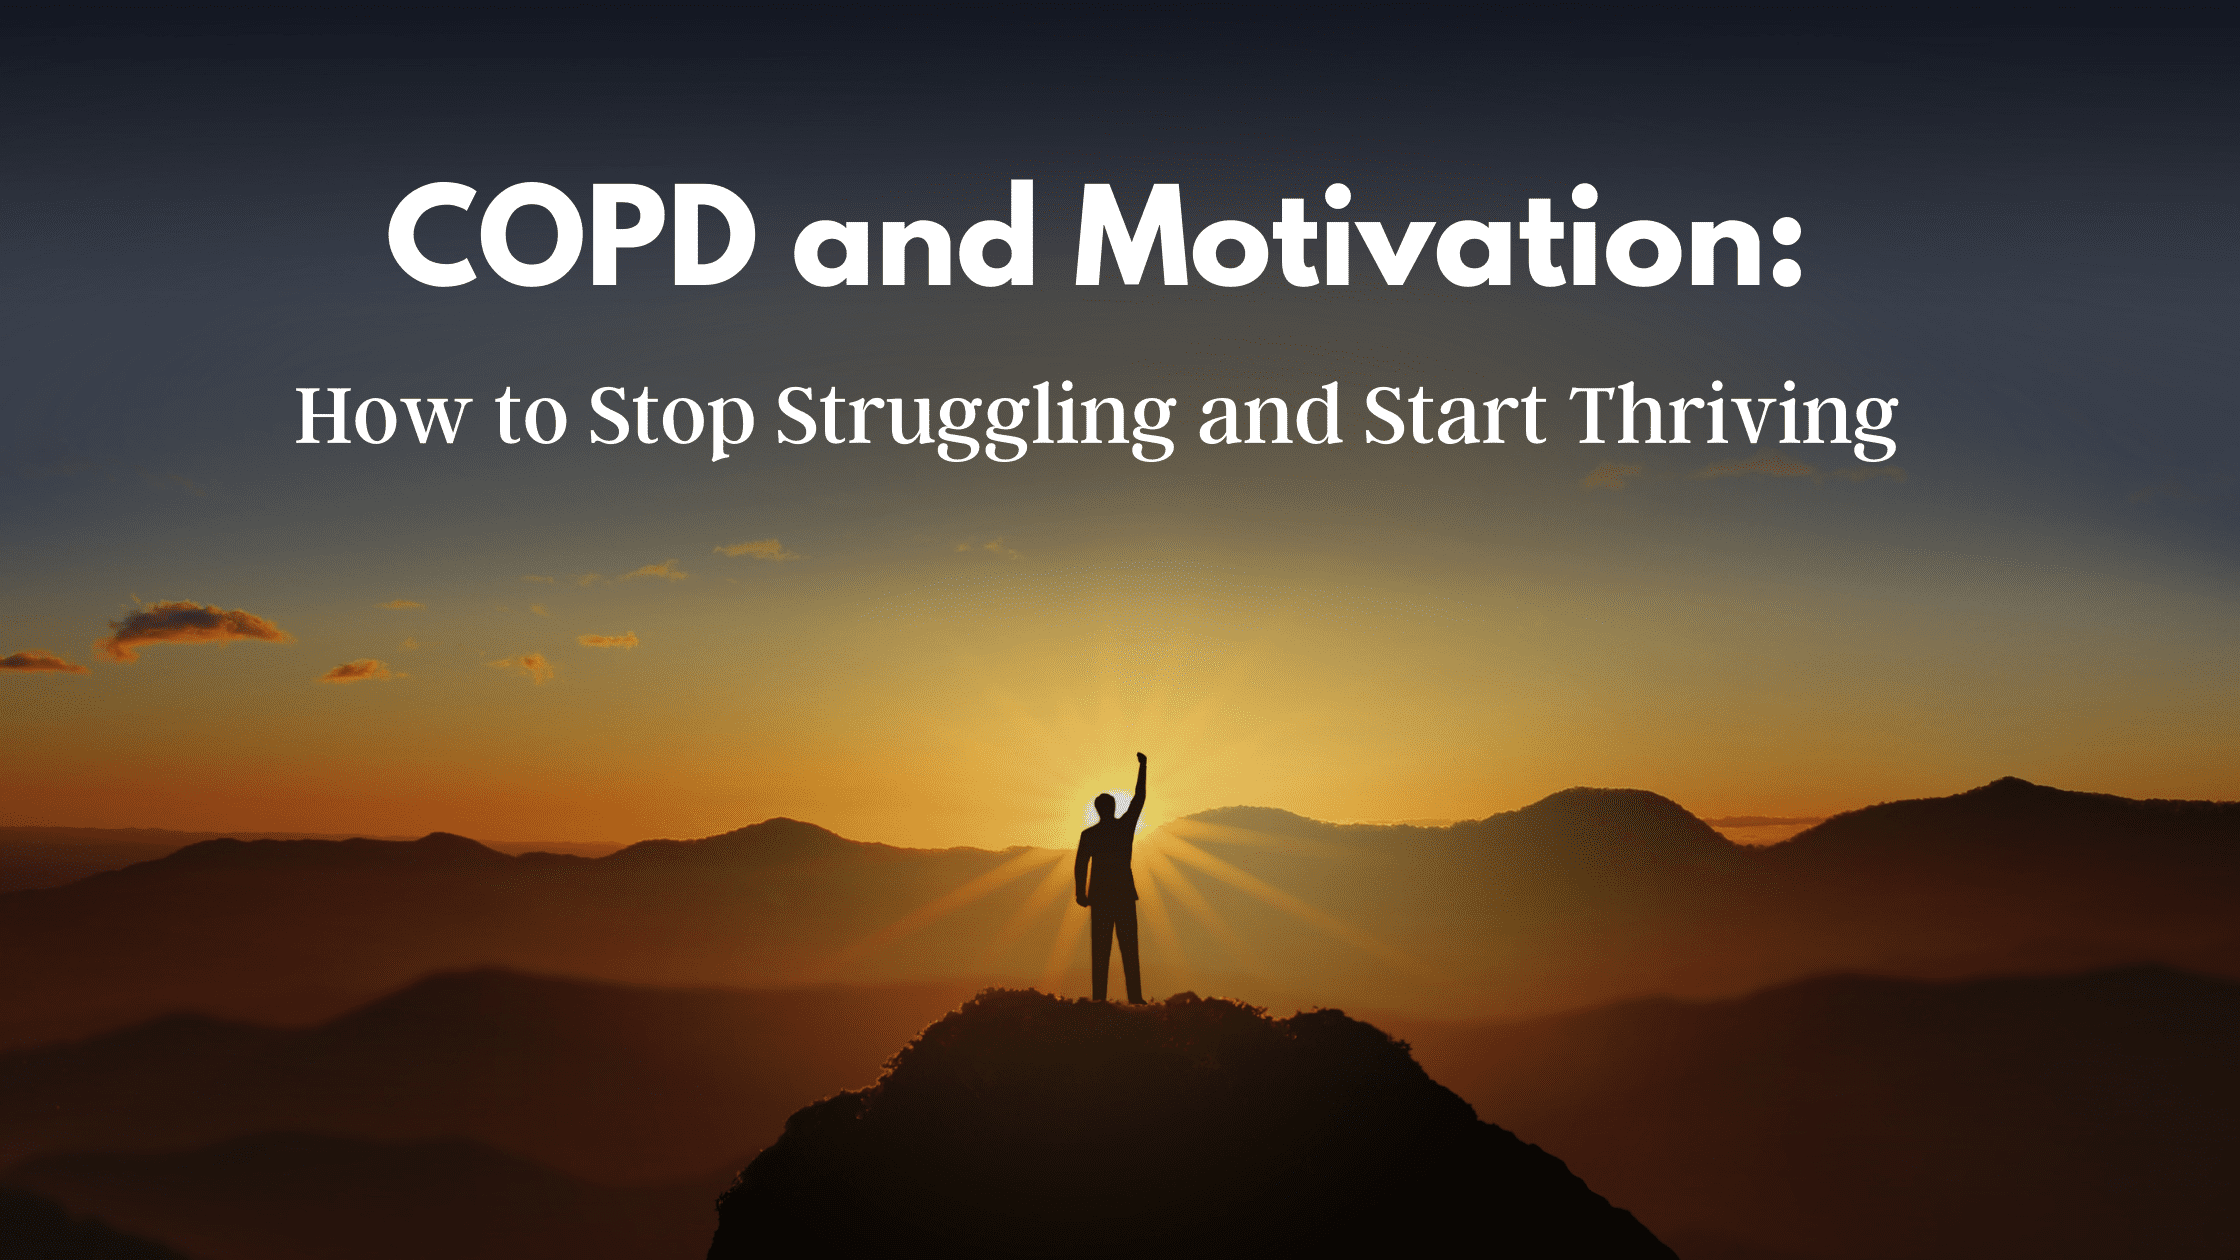 COPD and Motivation: How to Stop Struggling and Start Thriving